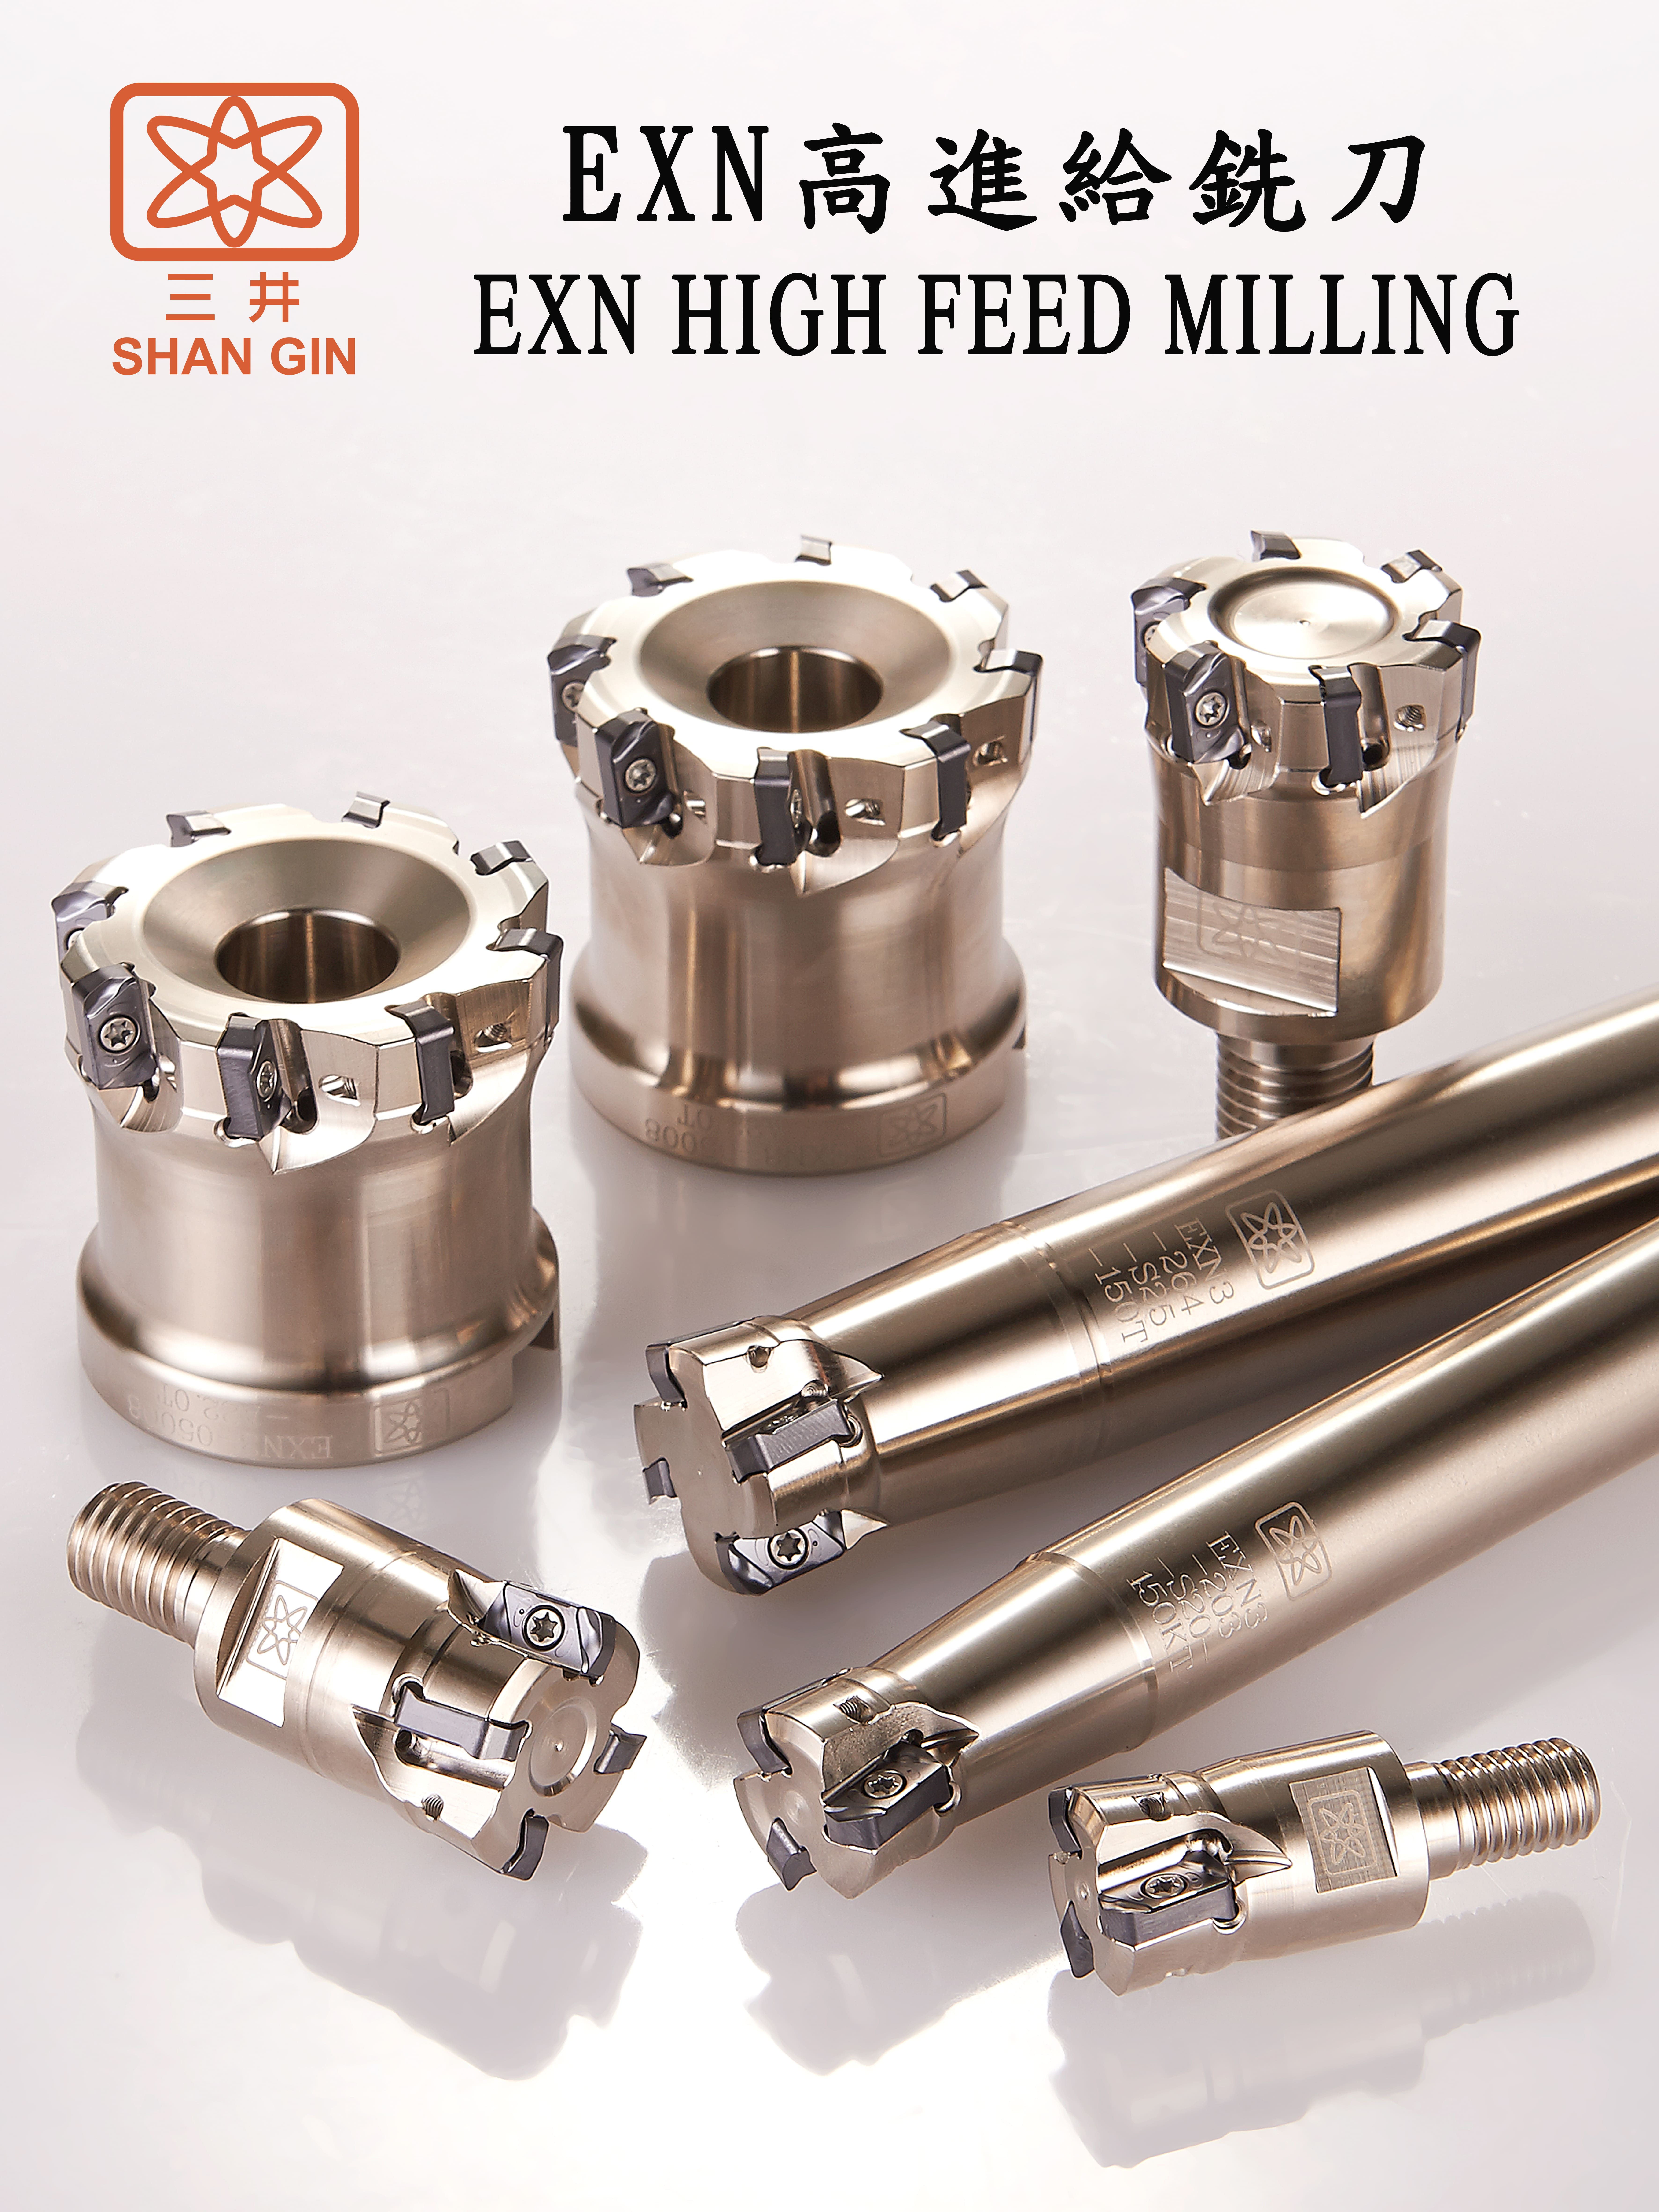 Catalog|EXN HIGH FEED MILLING